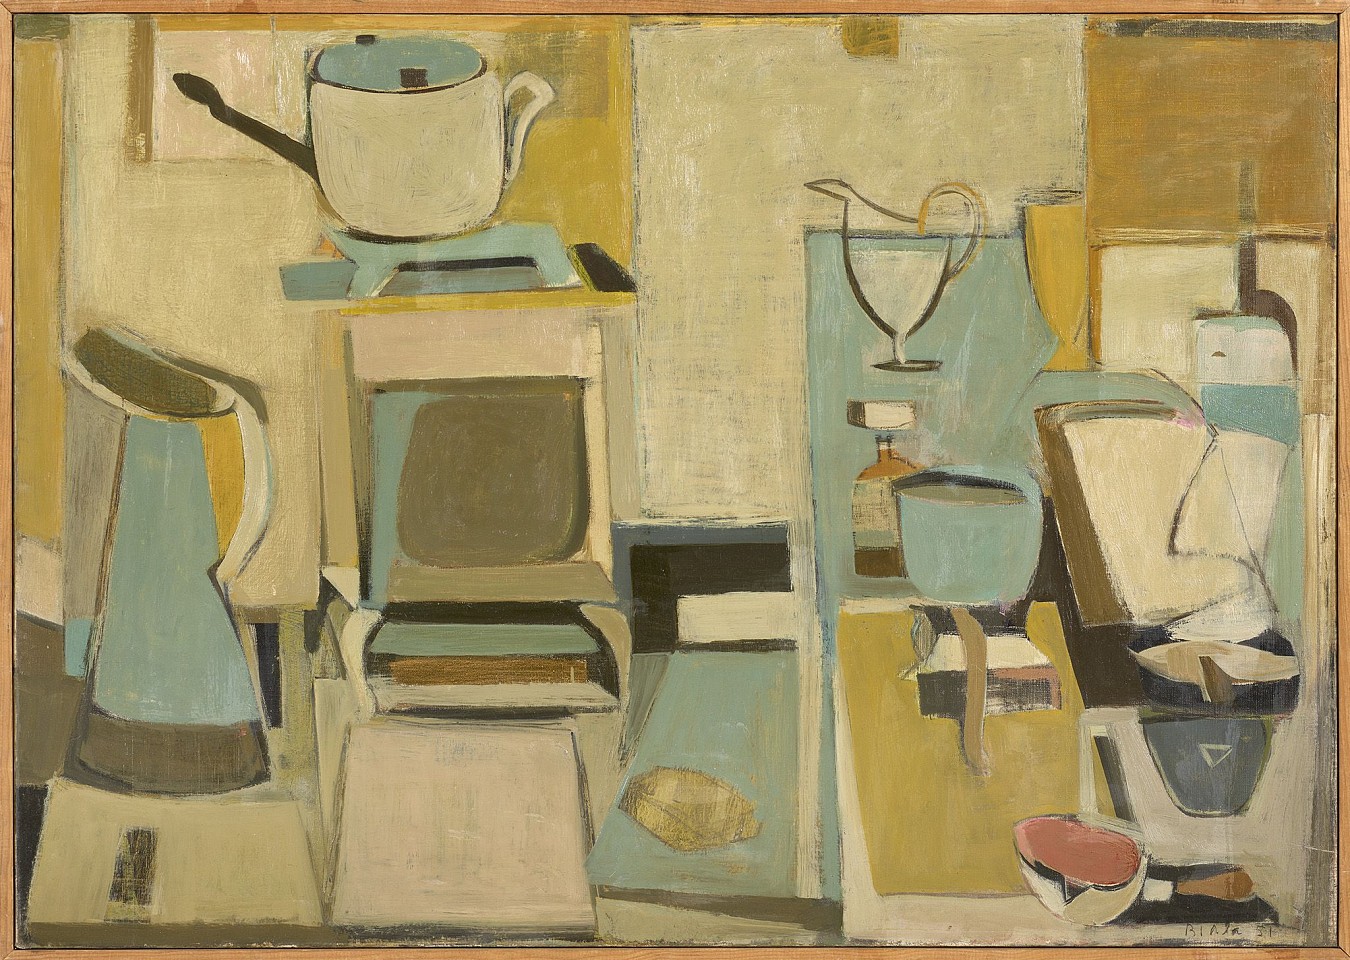 Janice Biala, White Still Life, 1951
Oil on canvas, 25 1/2 x 36 in. (64.8 x 91.4 cm)
BIAL-00025